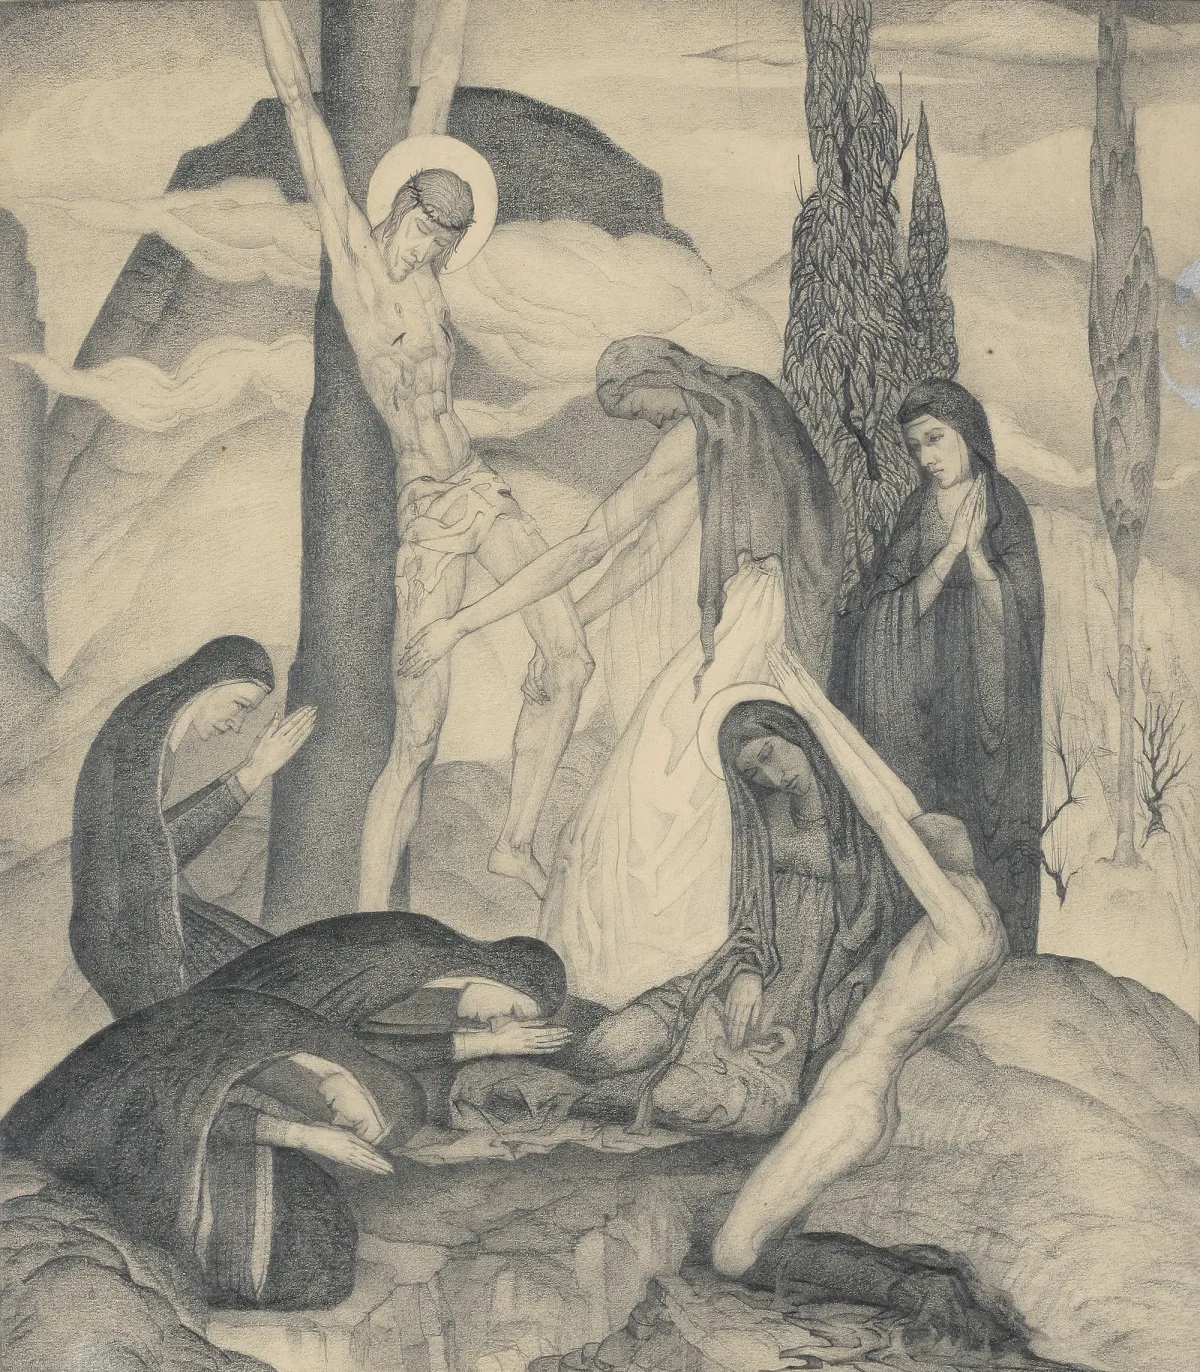 Pencil illustration titled 'Portrayal of the Cross' by Gilbert Yim from 1929, presenting a religious scene of Jesus crucified, with people praying at the foot of the cross.